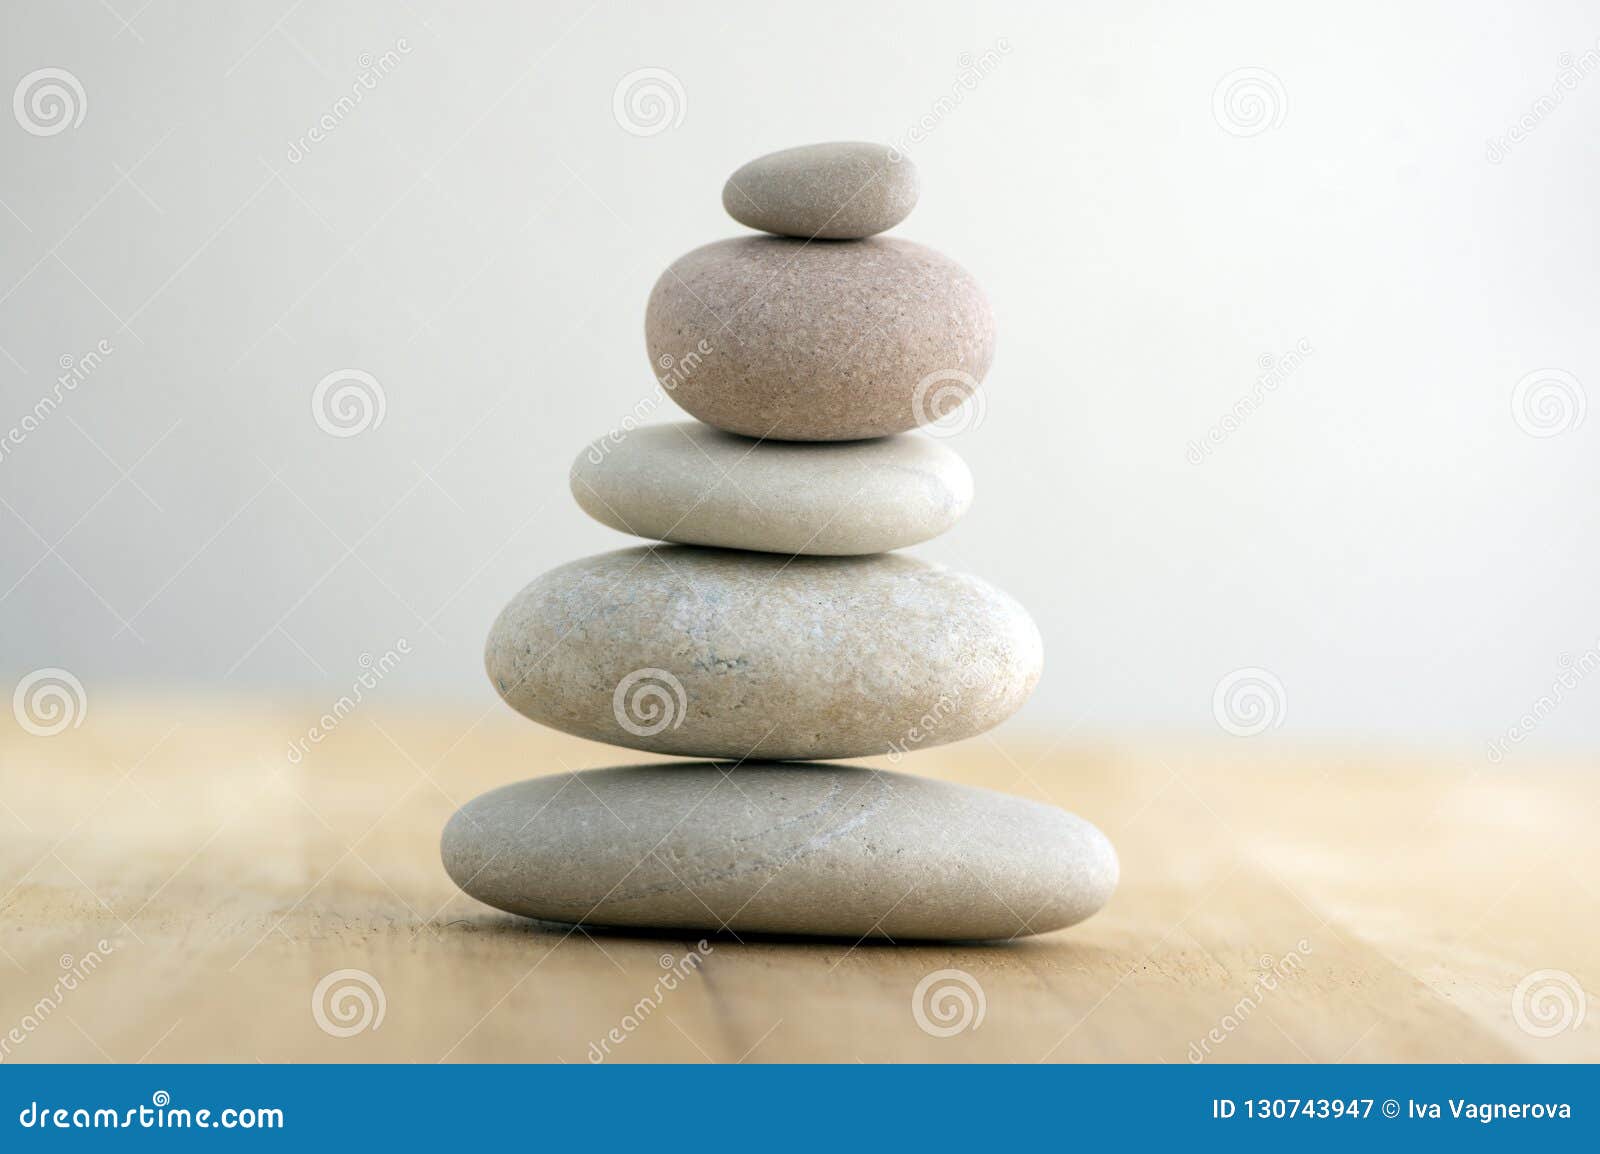 stone cairn on striped grey white background, five stones tower, simple poise stones, simplicity harmony and balance, rock zen